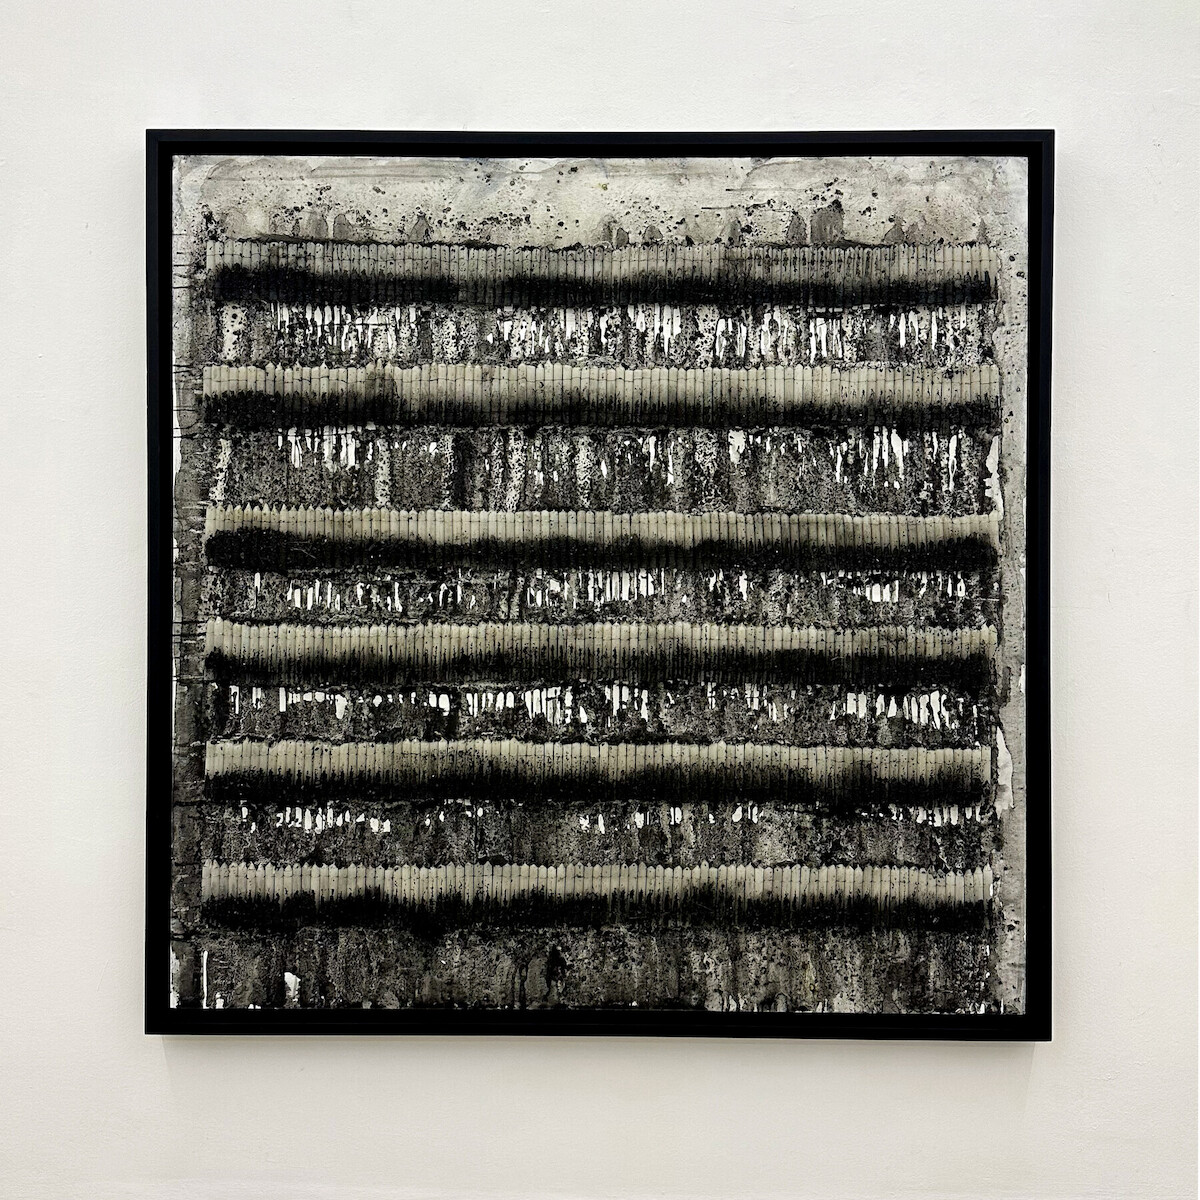 MOUHCINE RAHAOUI (BORN IN 1990)
SOLIDARIES V, 2022
Mixed media on panel
Charcoal, candles and wax
150 x 150 cm